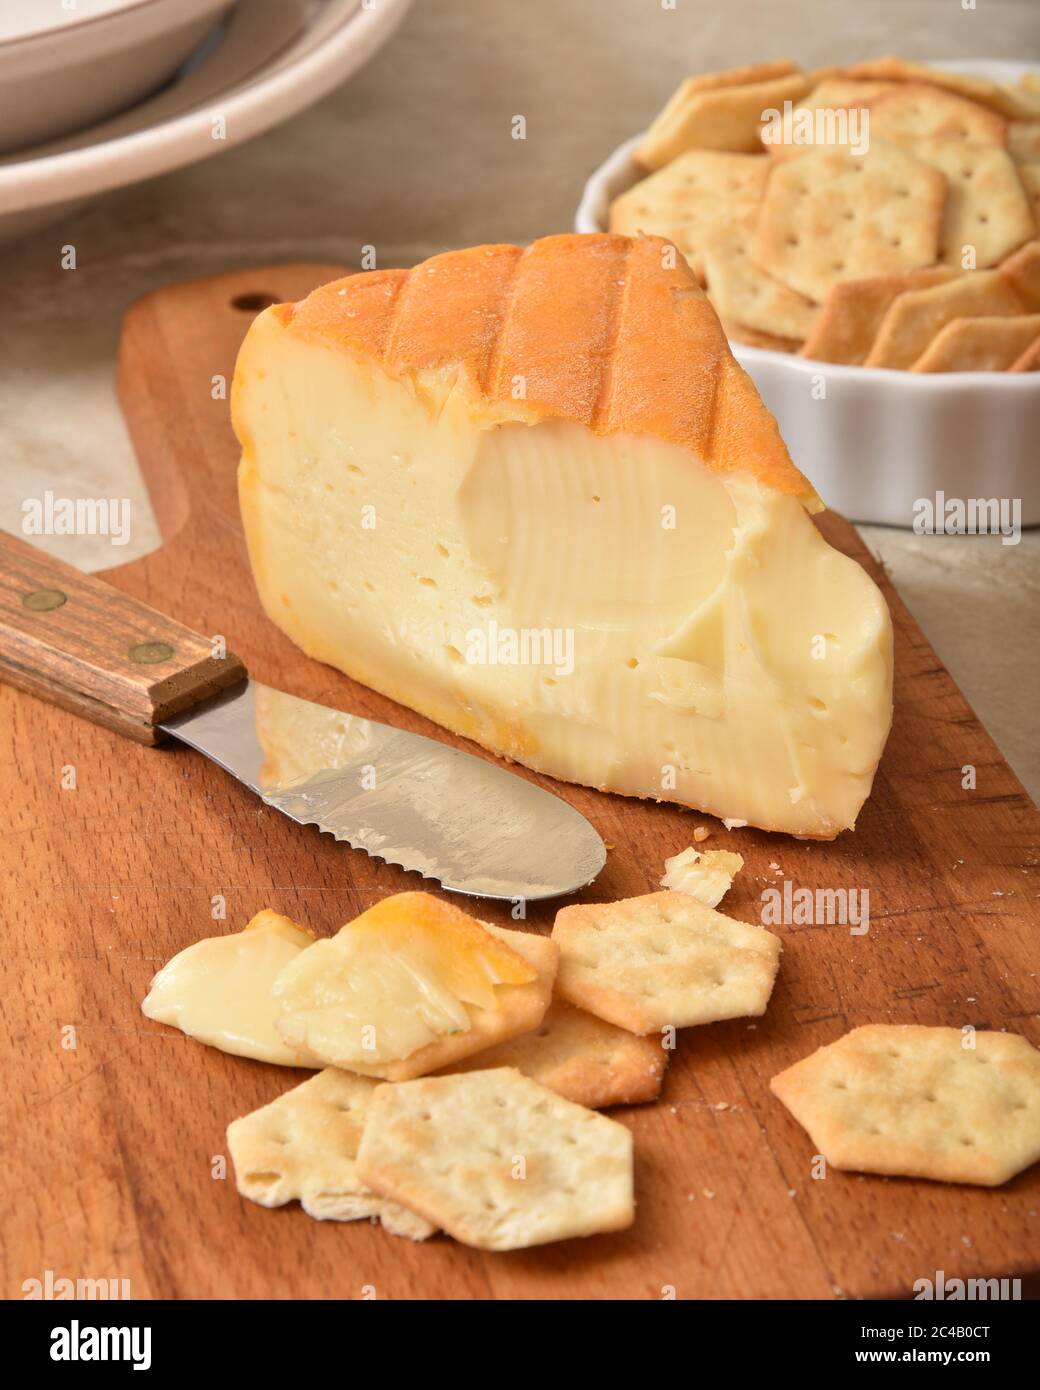 A wedge of goumet imported Belgium Autumn Cheese with artisan crackers. Focus on cheese wedge Stock Photo